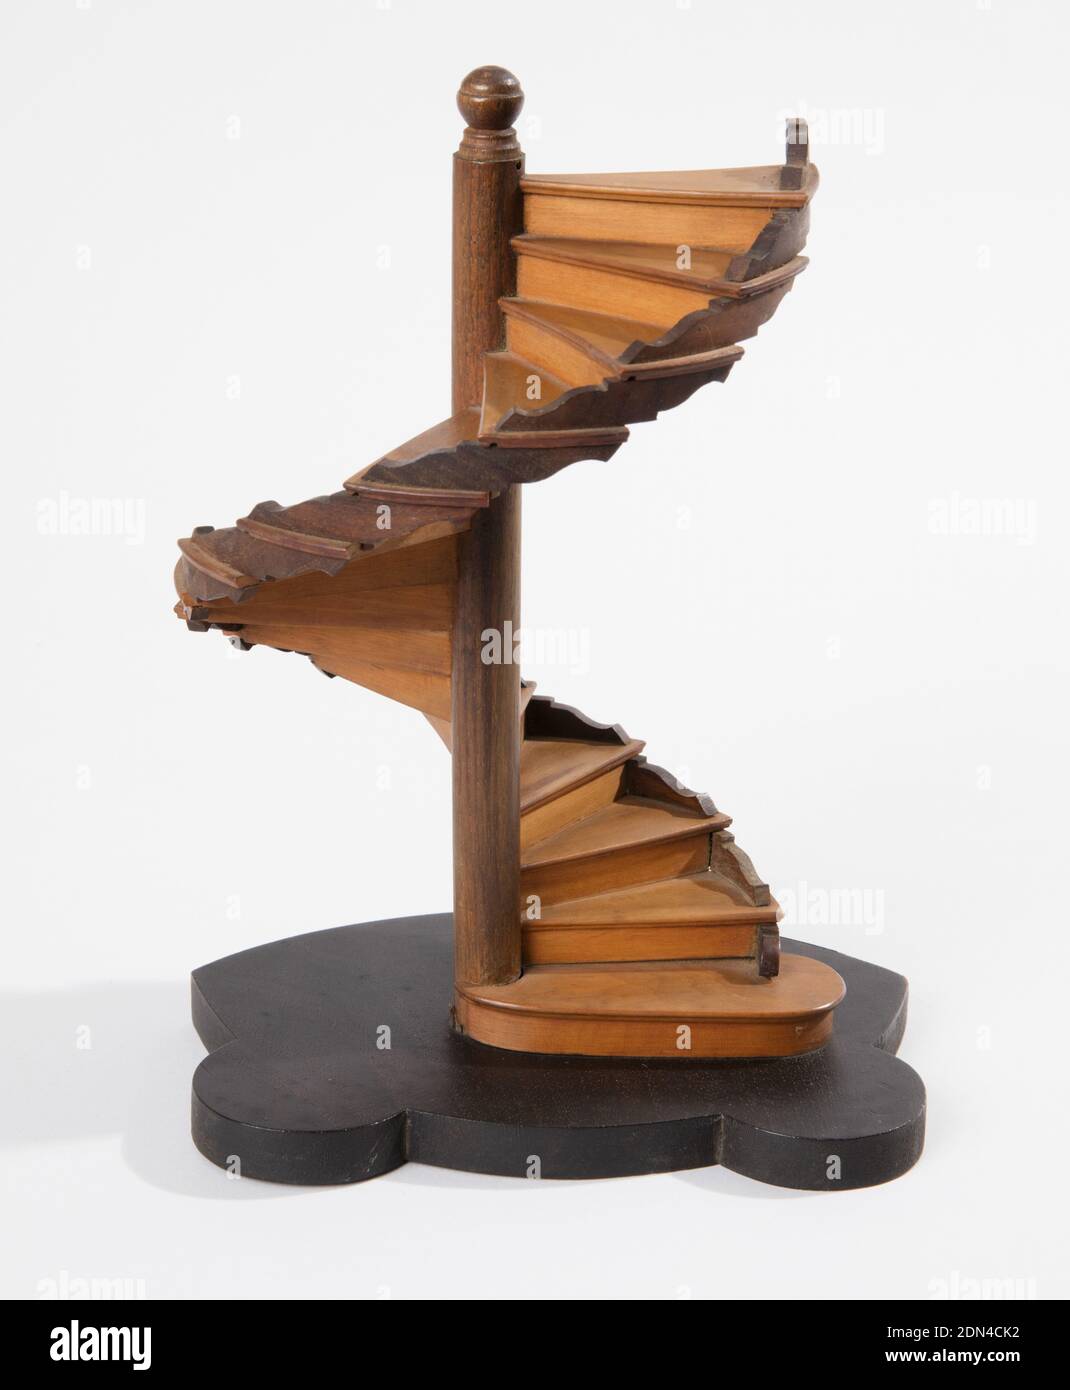 Staircase model, Planed and joined wood, Spiral staircase model with central post on shaped base., France, ca. 1880, models and prototypes, Decorative Arts, Staircase model Stock Photo